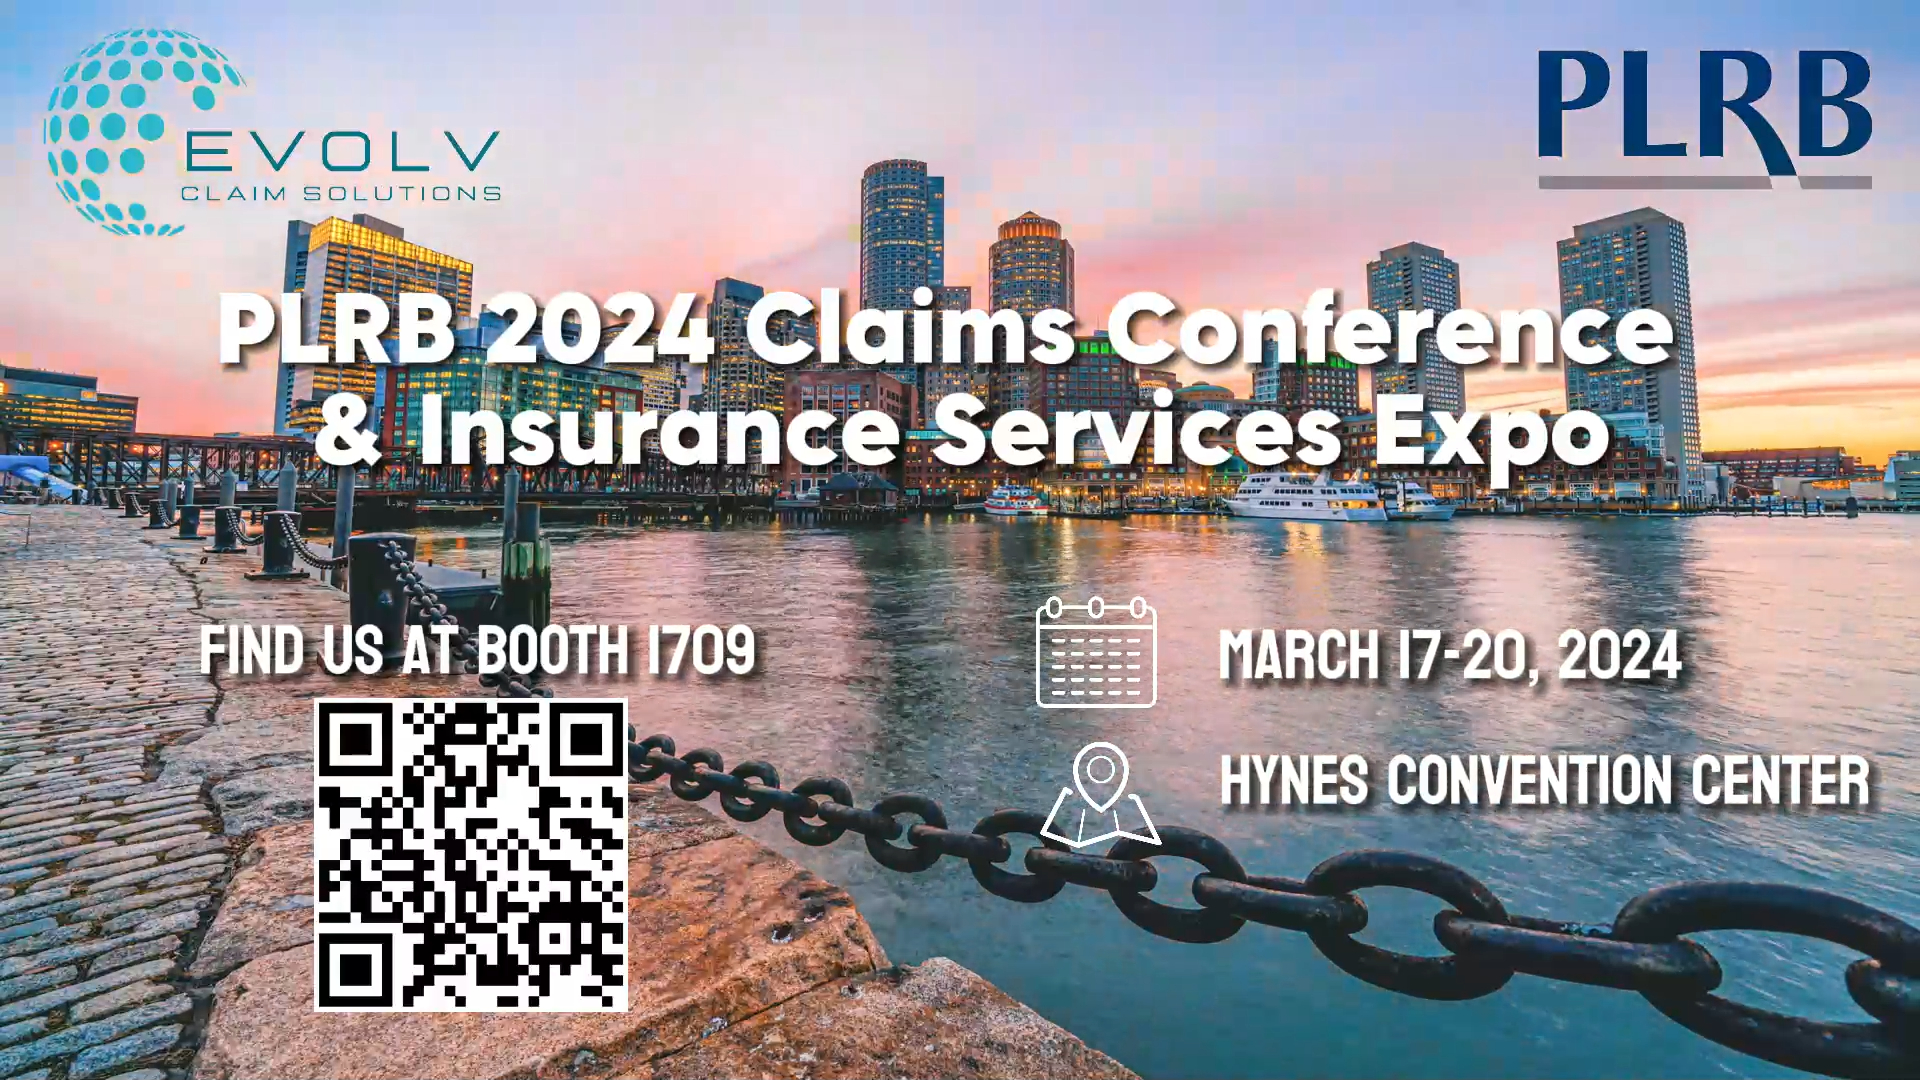 Evolv Claim Solutions will be exhibiting at P.L.R.B 2024 Claims Conference & Insurnace Services Expo!